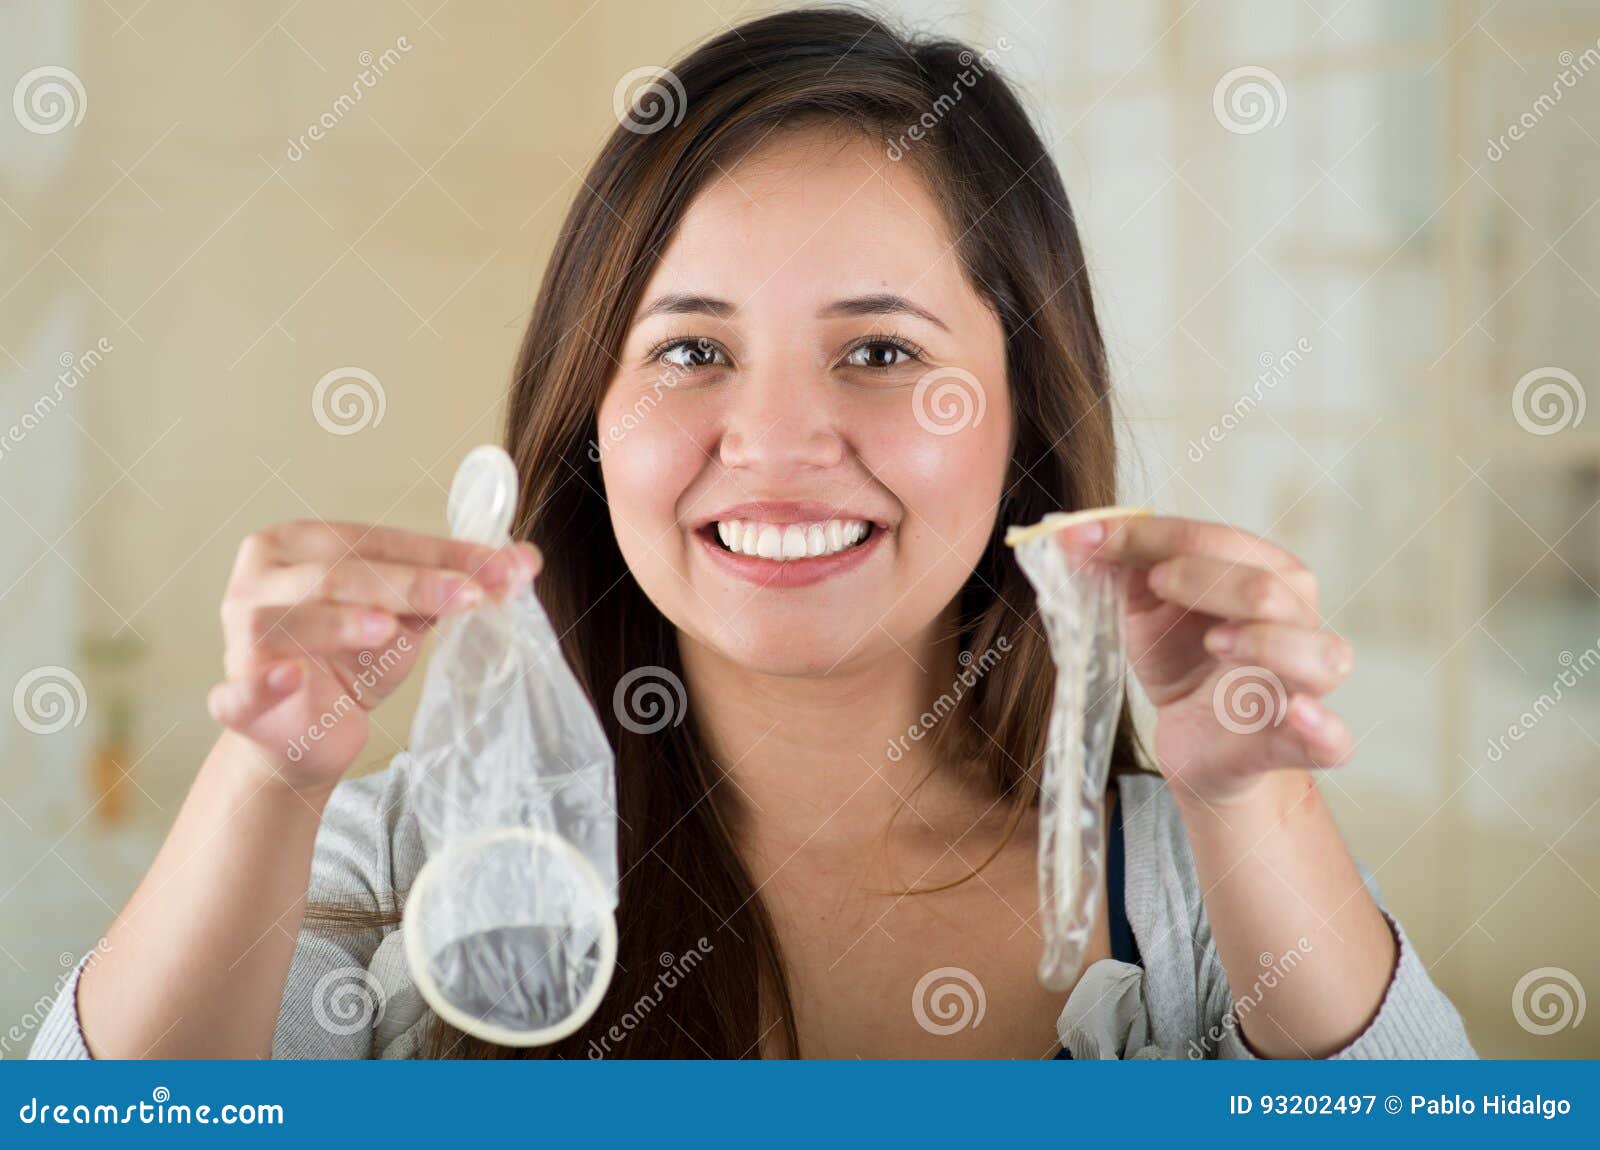 Surprised Girl Holding an Open Female Condom in One Hand and an Open Male Condon in Her Other Hand, Safe Sex Concept Stock Image photo